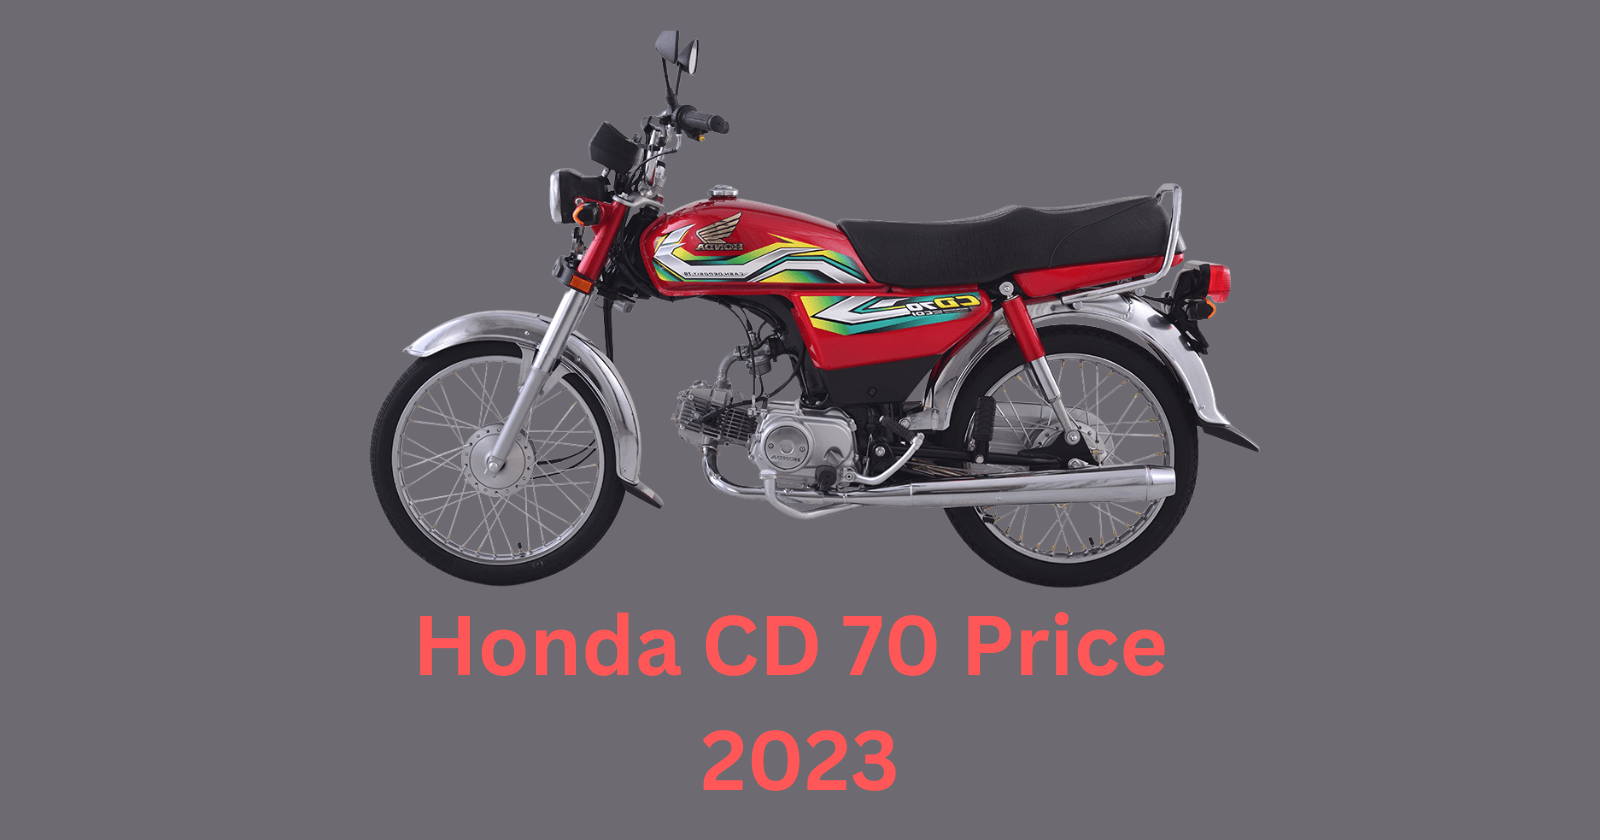 Honda CD 70 Latest Price and Installment Plan for March 2023